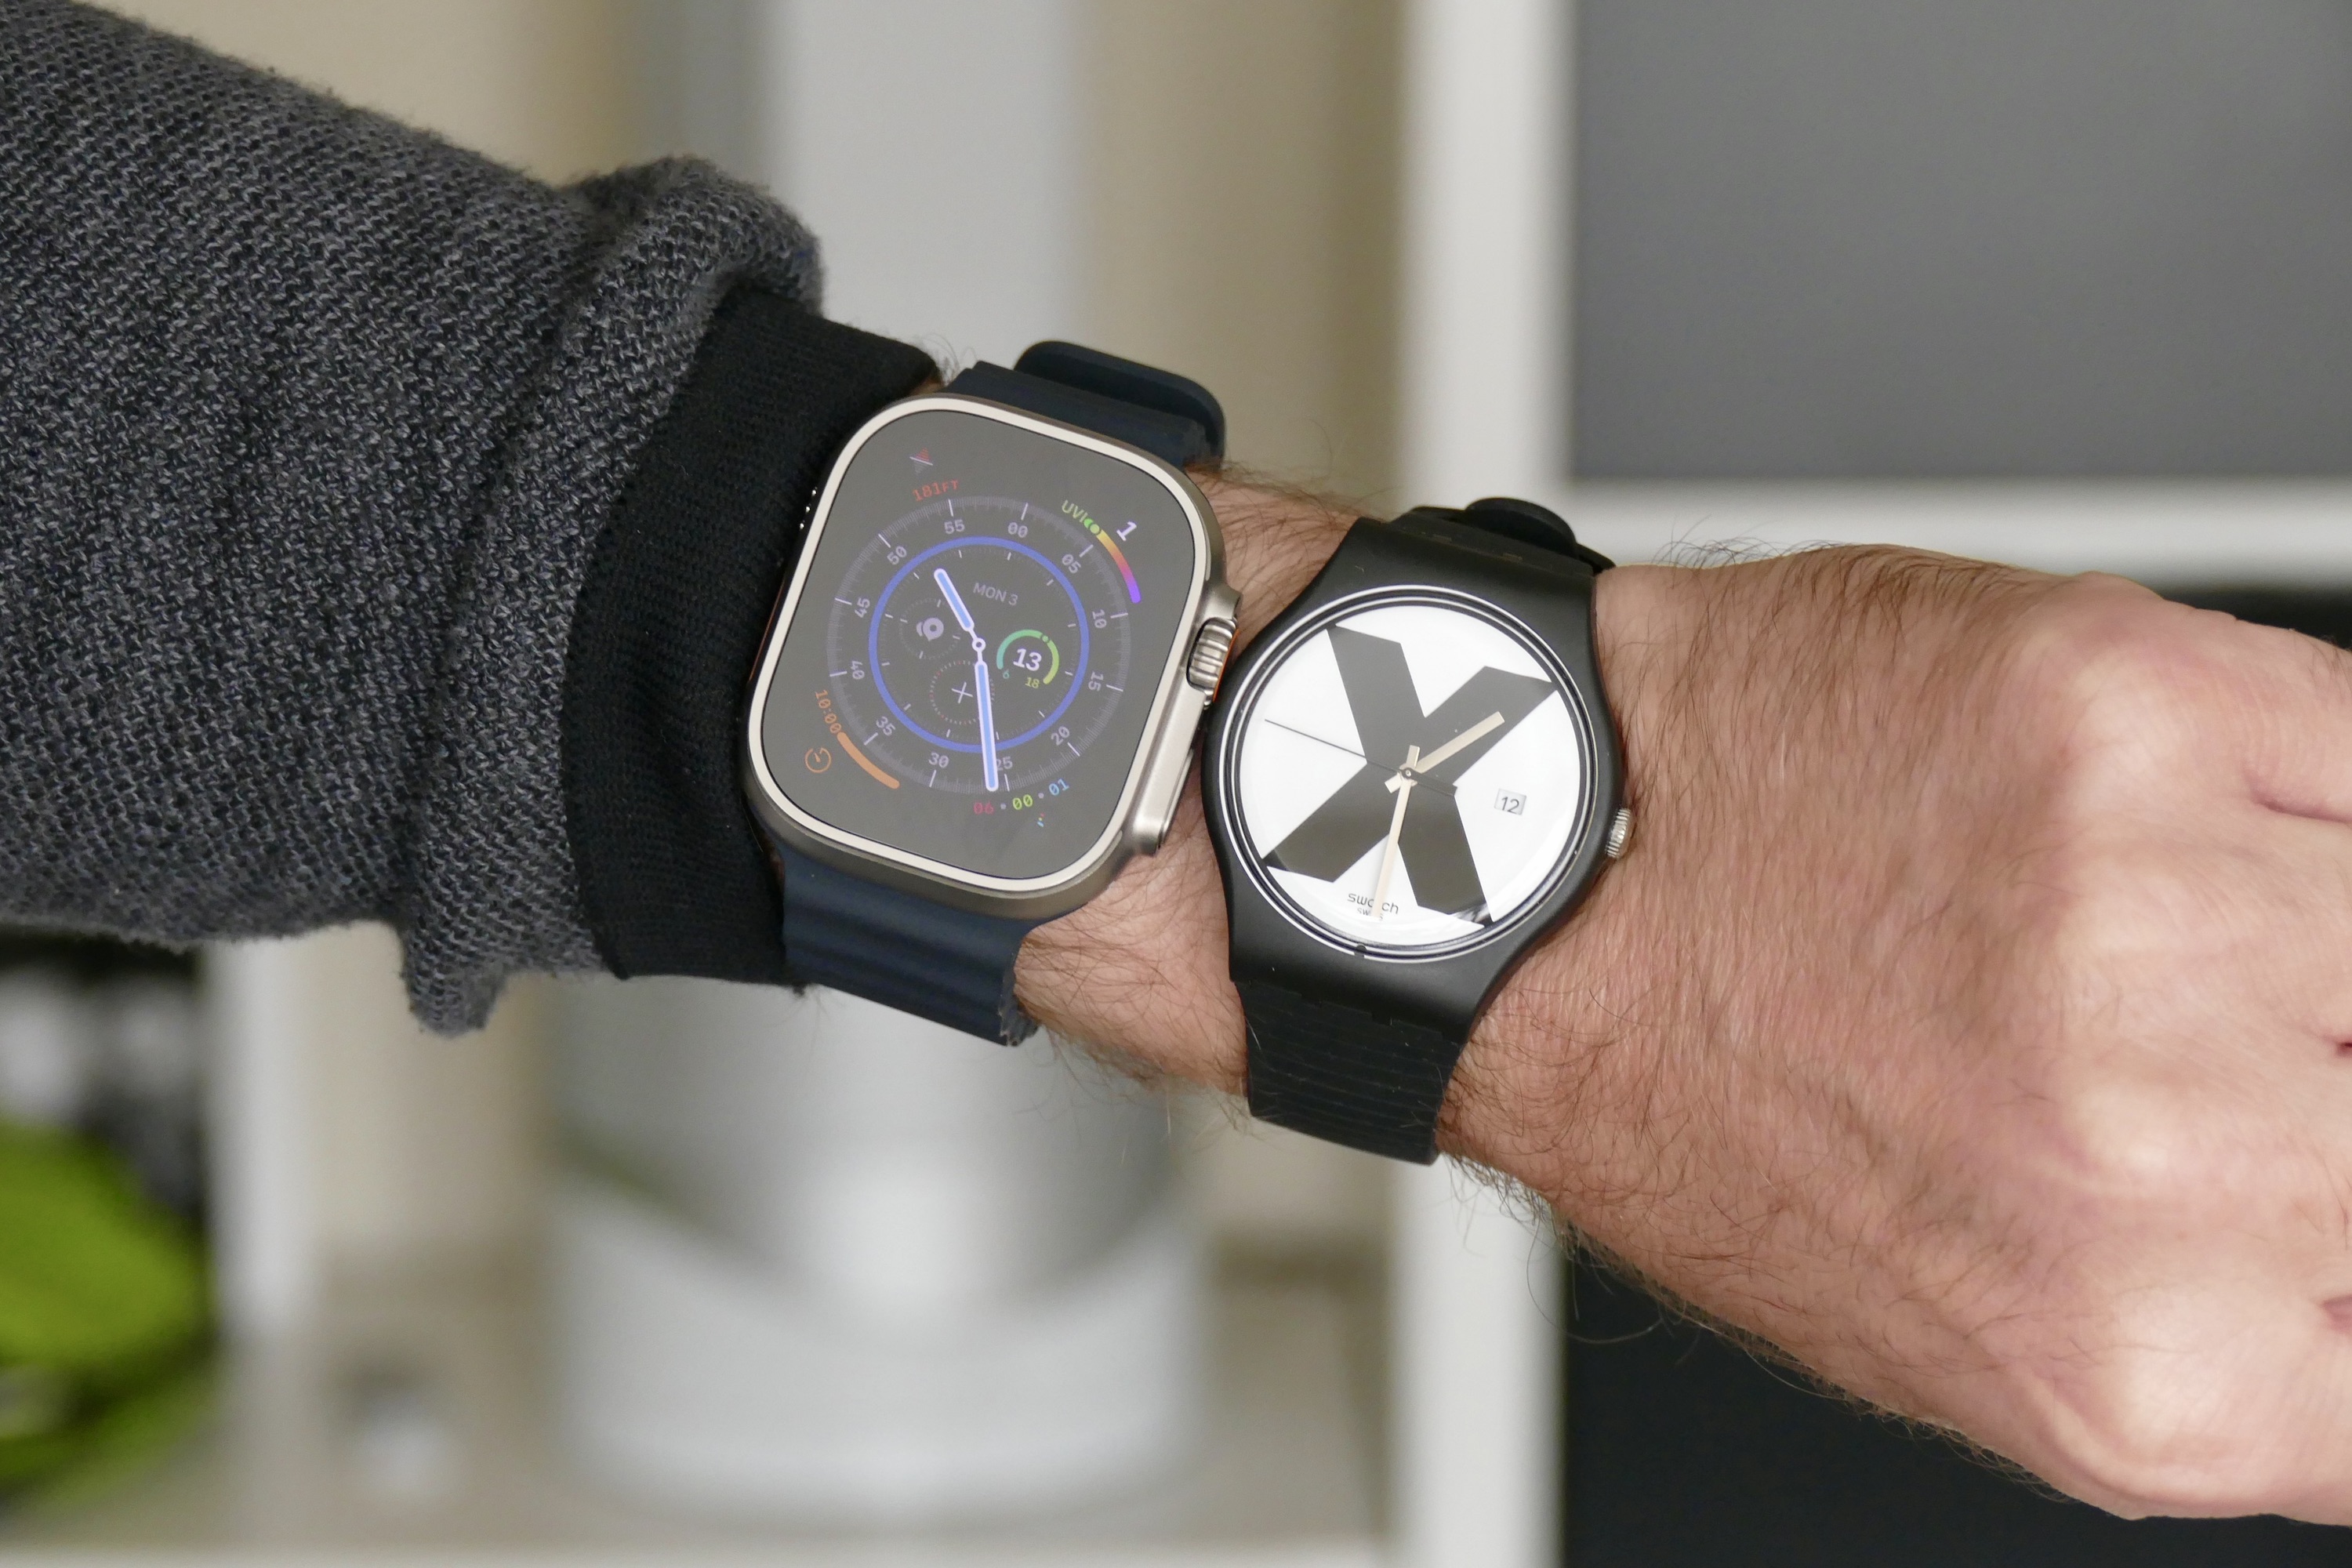 The Apple Watch Ultra and the Swatch XX-Rated watch.